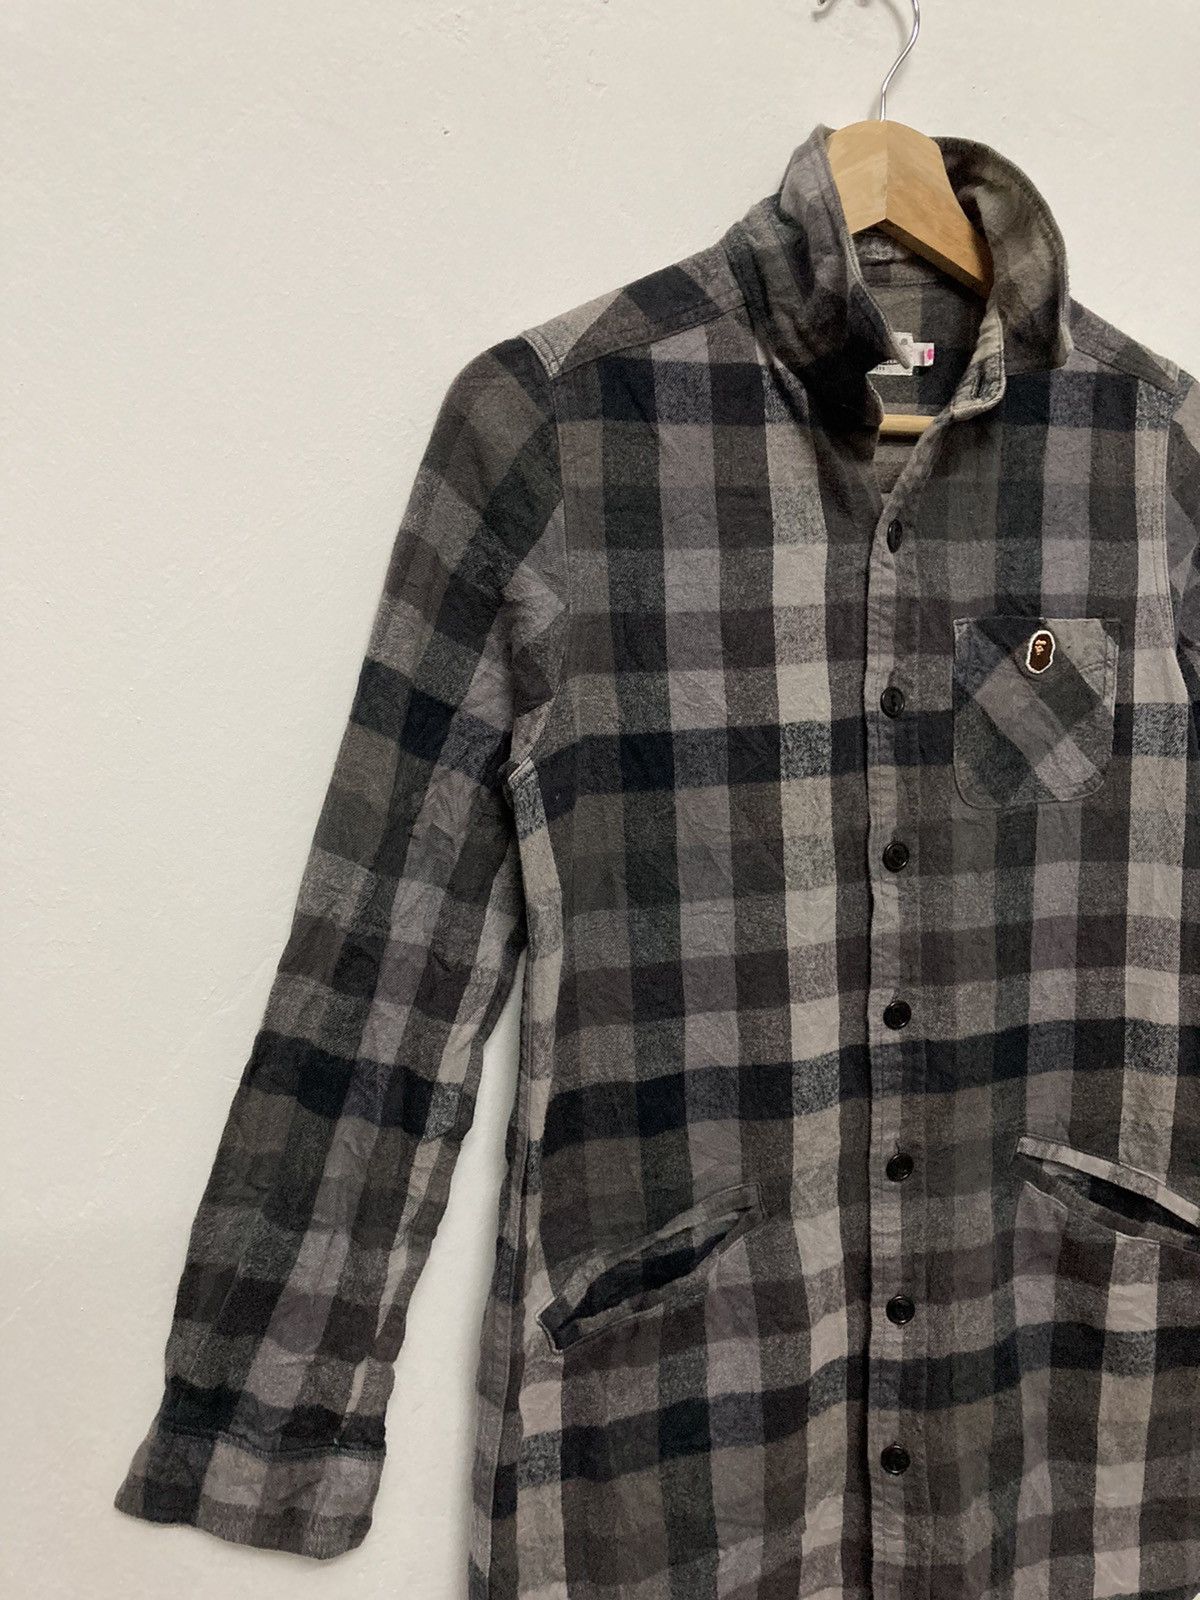 Bape Button Up Checker Flannel Shirt Made in Japan - 5